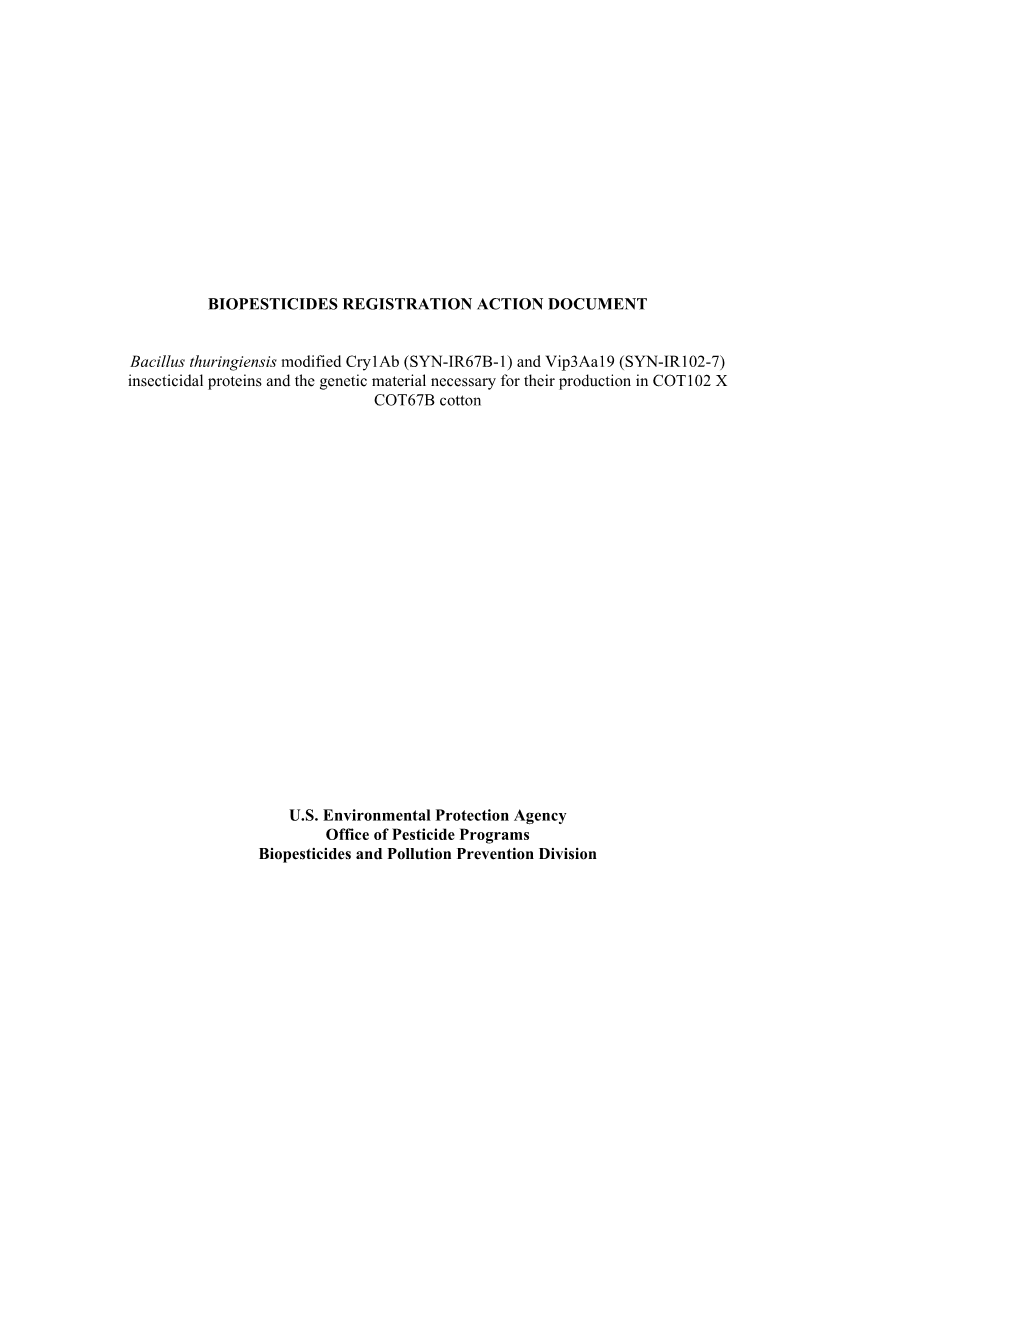 Technical Document for Bacillus Thuringiensis Vip3aa19